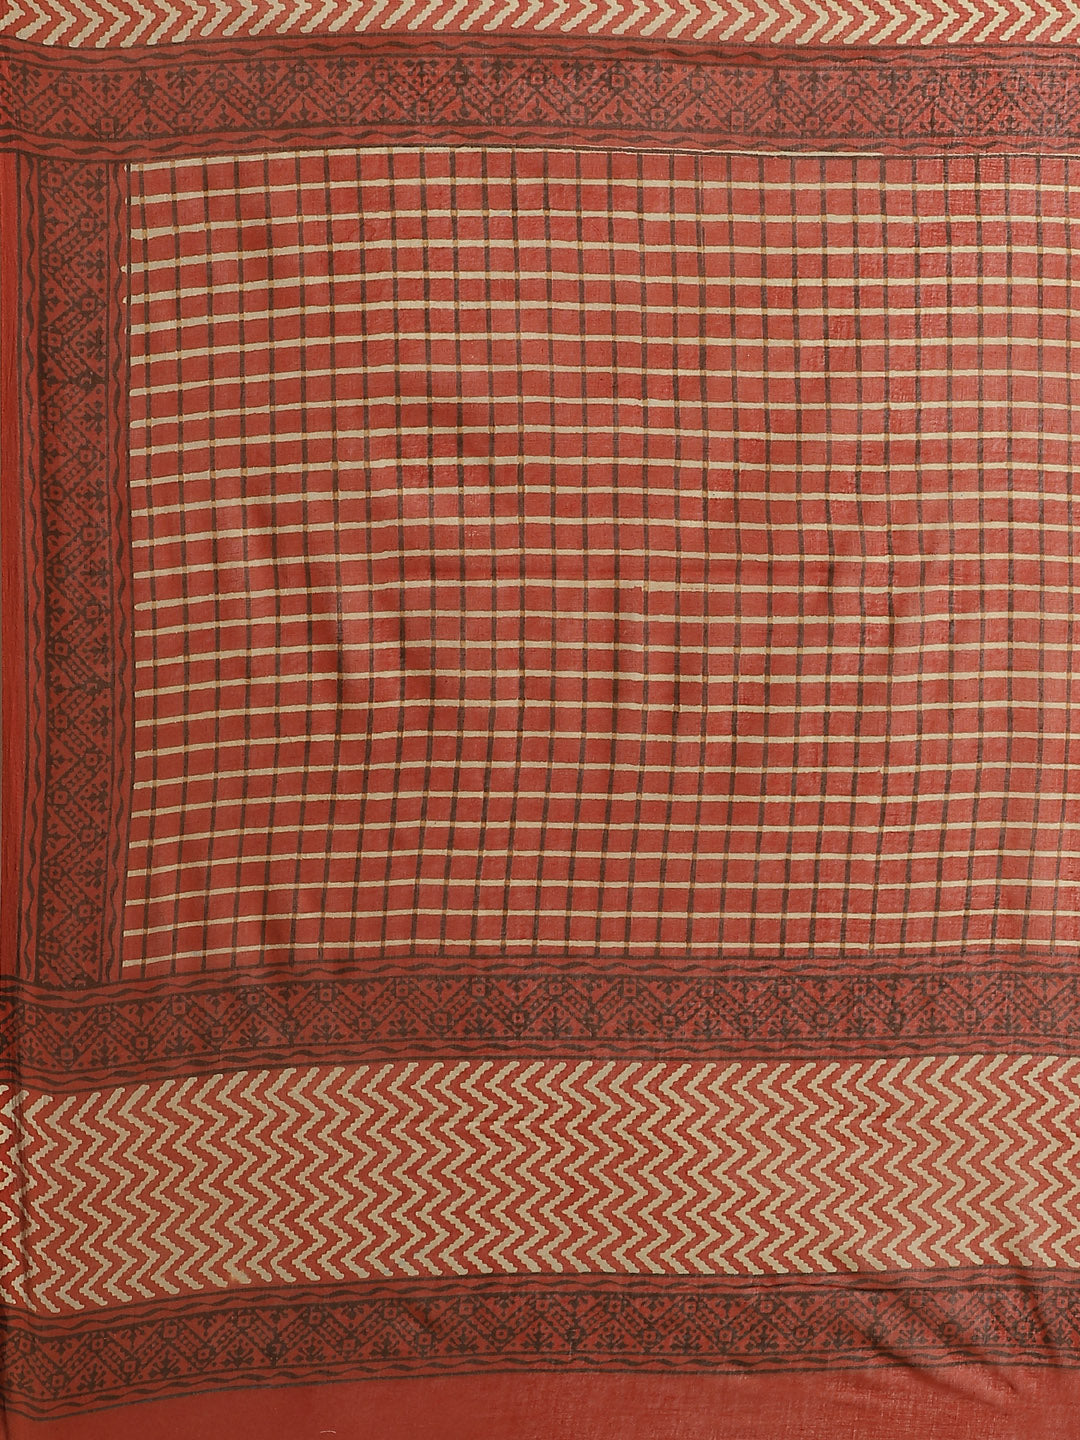 Brown and White, Kalakari India Cotton Brown Hand crafted saree with blouse BAPASA0102-Saree-Kalakari India-BAPASA0102-Block Print, Cotton, Geographical Indication, Hand Crafted, Heritage Prints, Natural Dyes, Red, Sarees, Sustainable Fabrics, Woven, Yellow-[Linen,Ethnic,wear,Fashionista,Handloom,Handicraft,Indigo,blockprint,block,print,Cotton,Chanderi,Blue, latest,classy,party,bollywood,trendy,summer,style,traditional,formal,elegant,unique,style,hand,block,print, dabu,booti,gift,present,glamoro